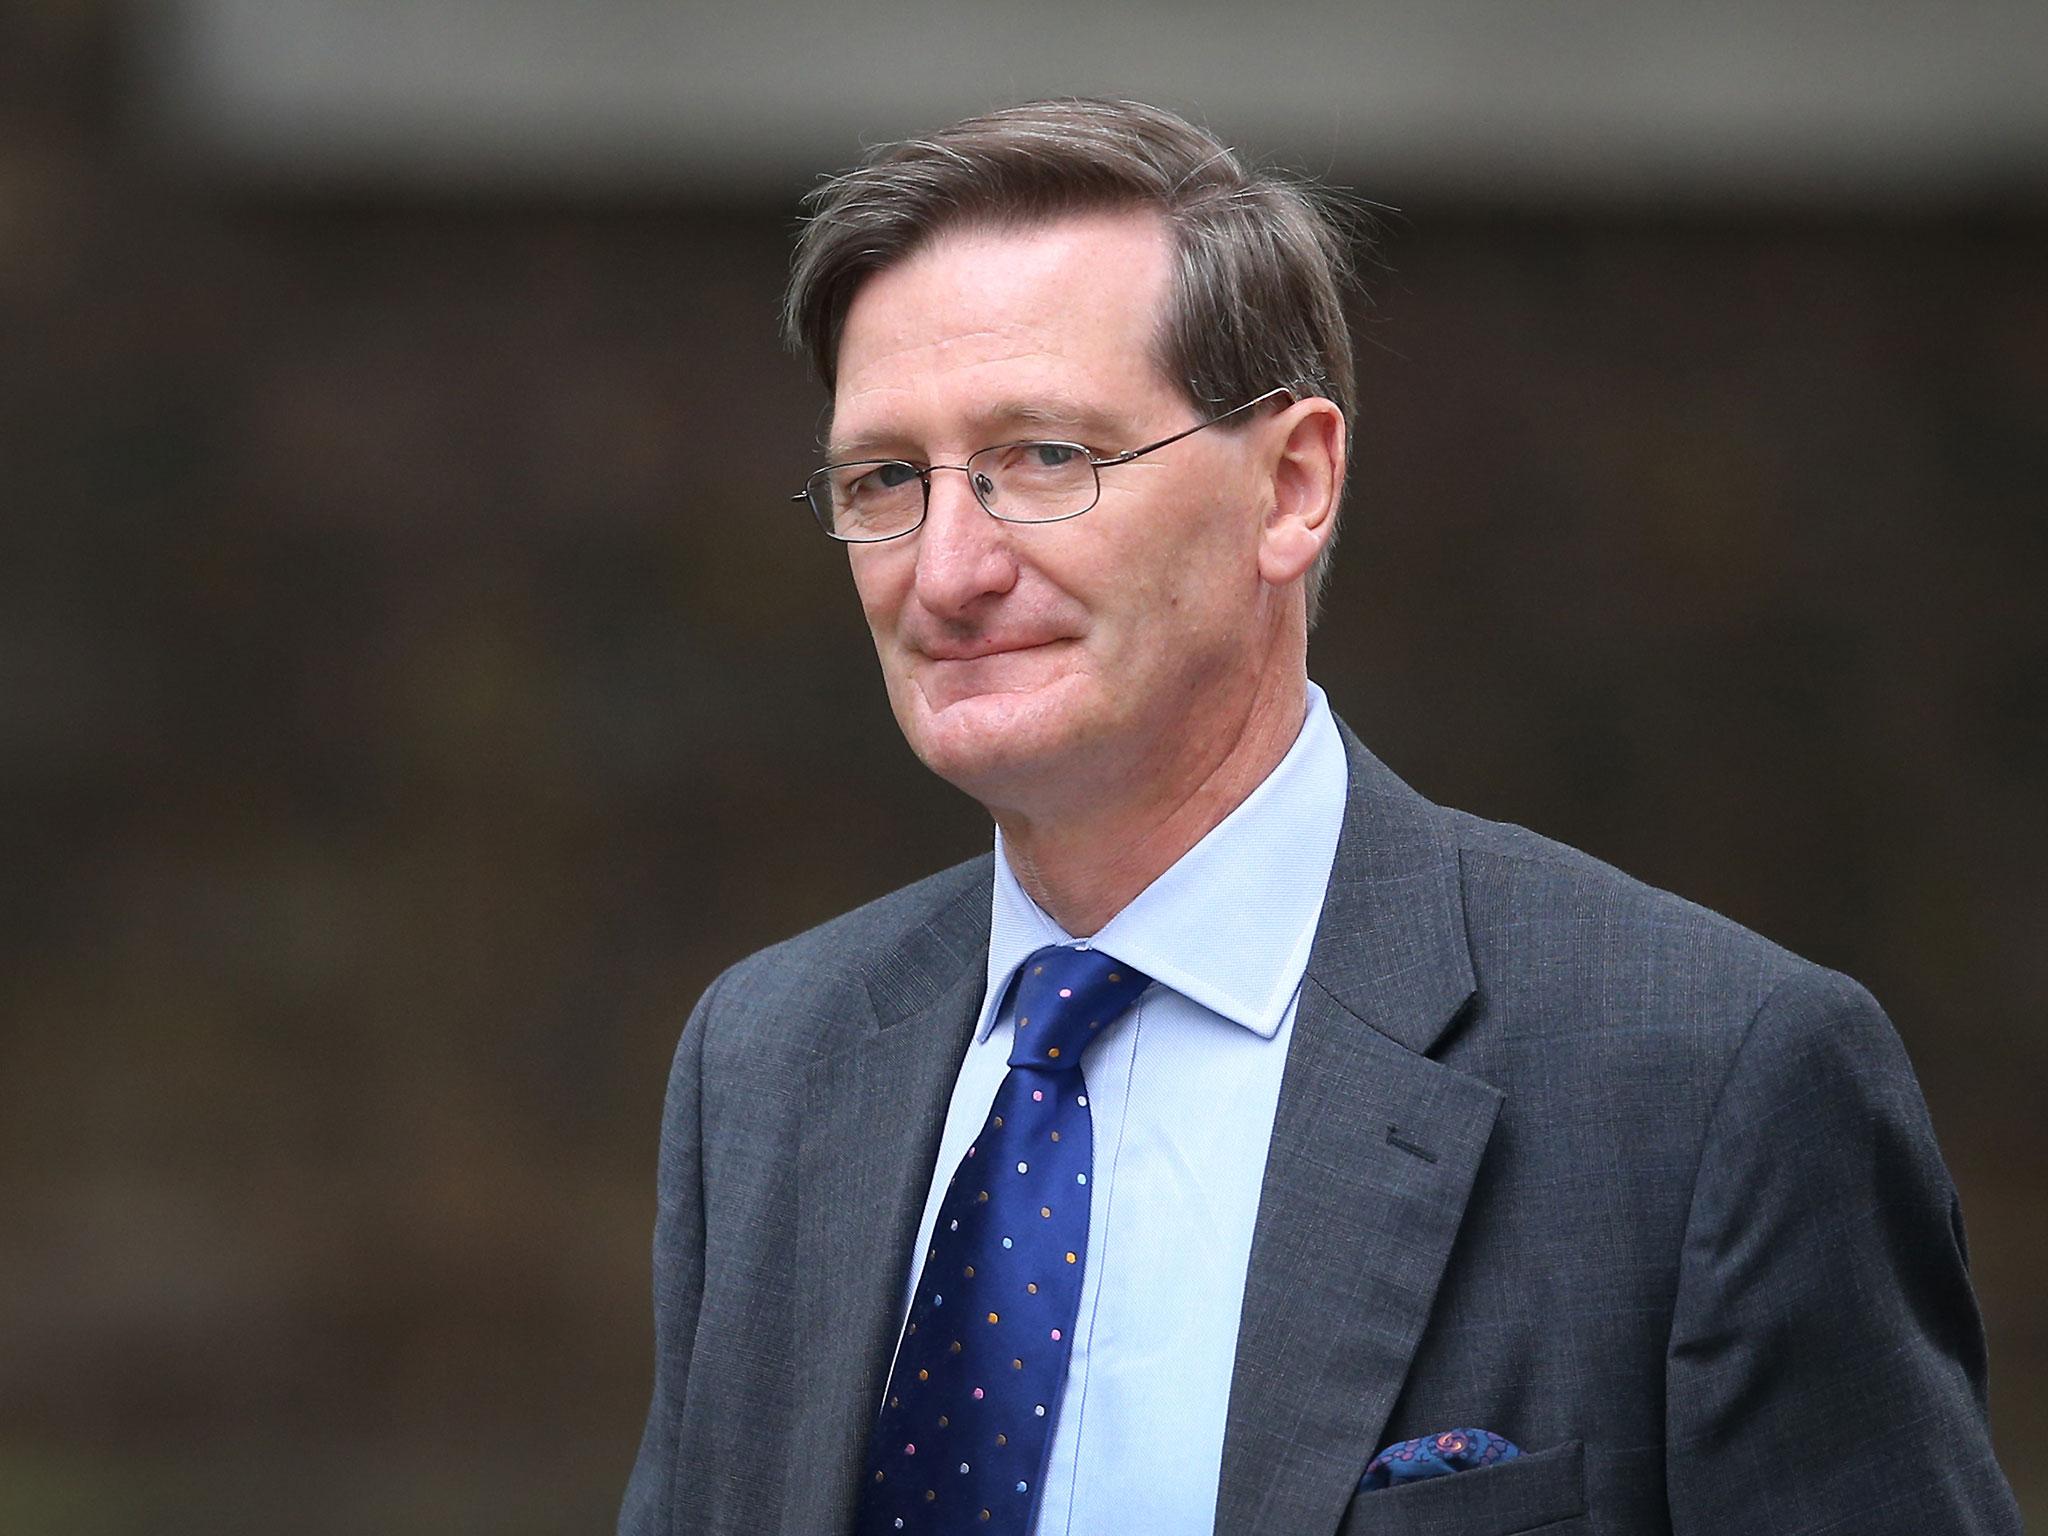 Dominic Grieve appears to have had Twitter in his sights for some time